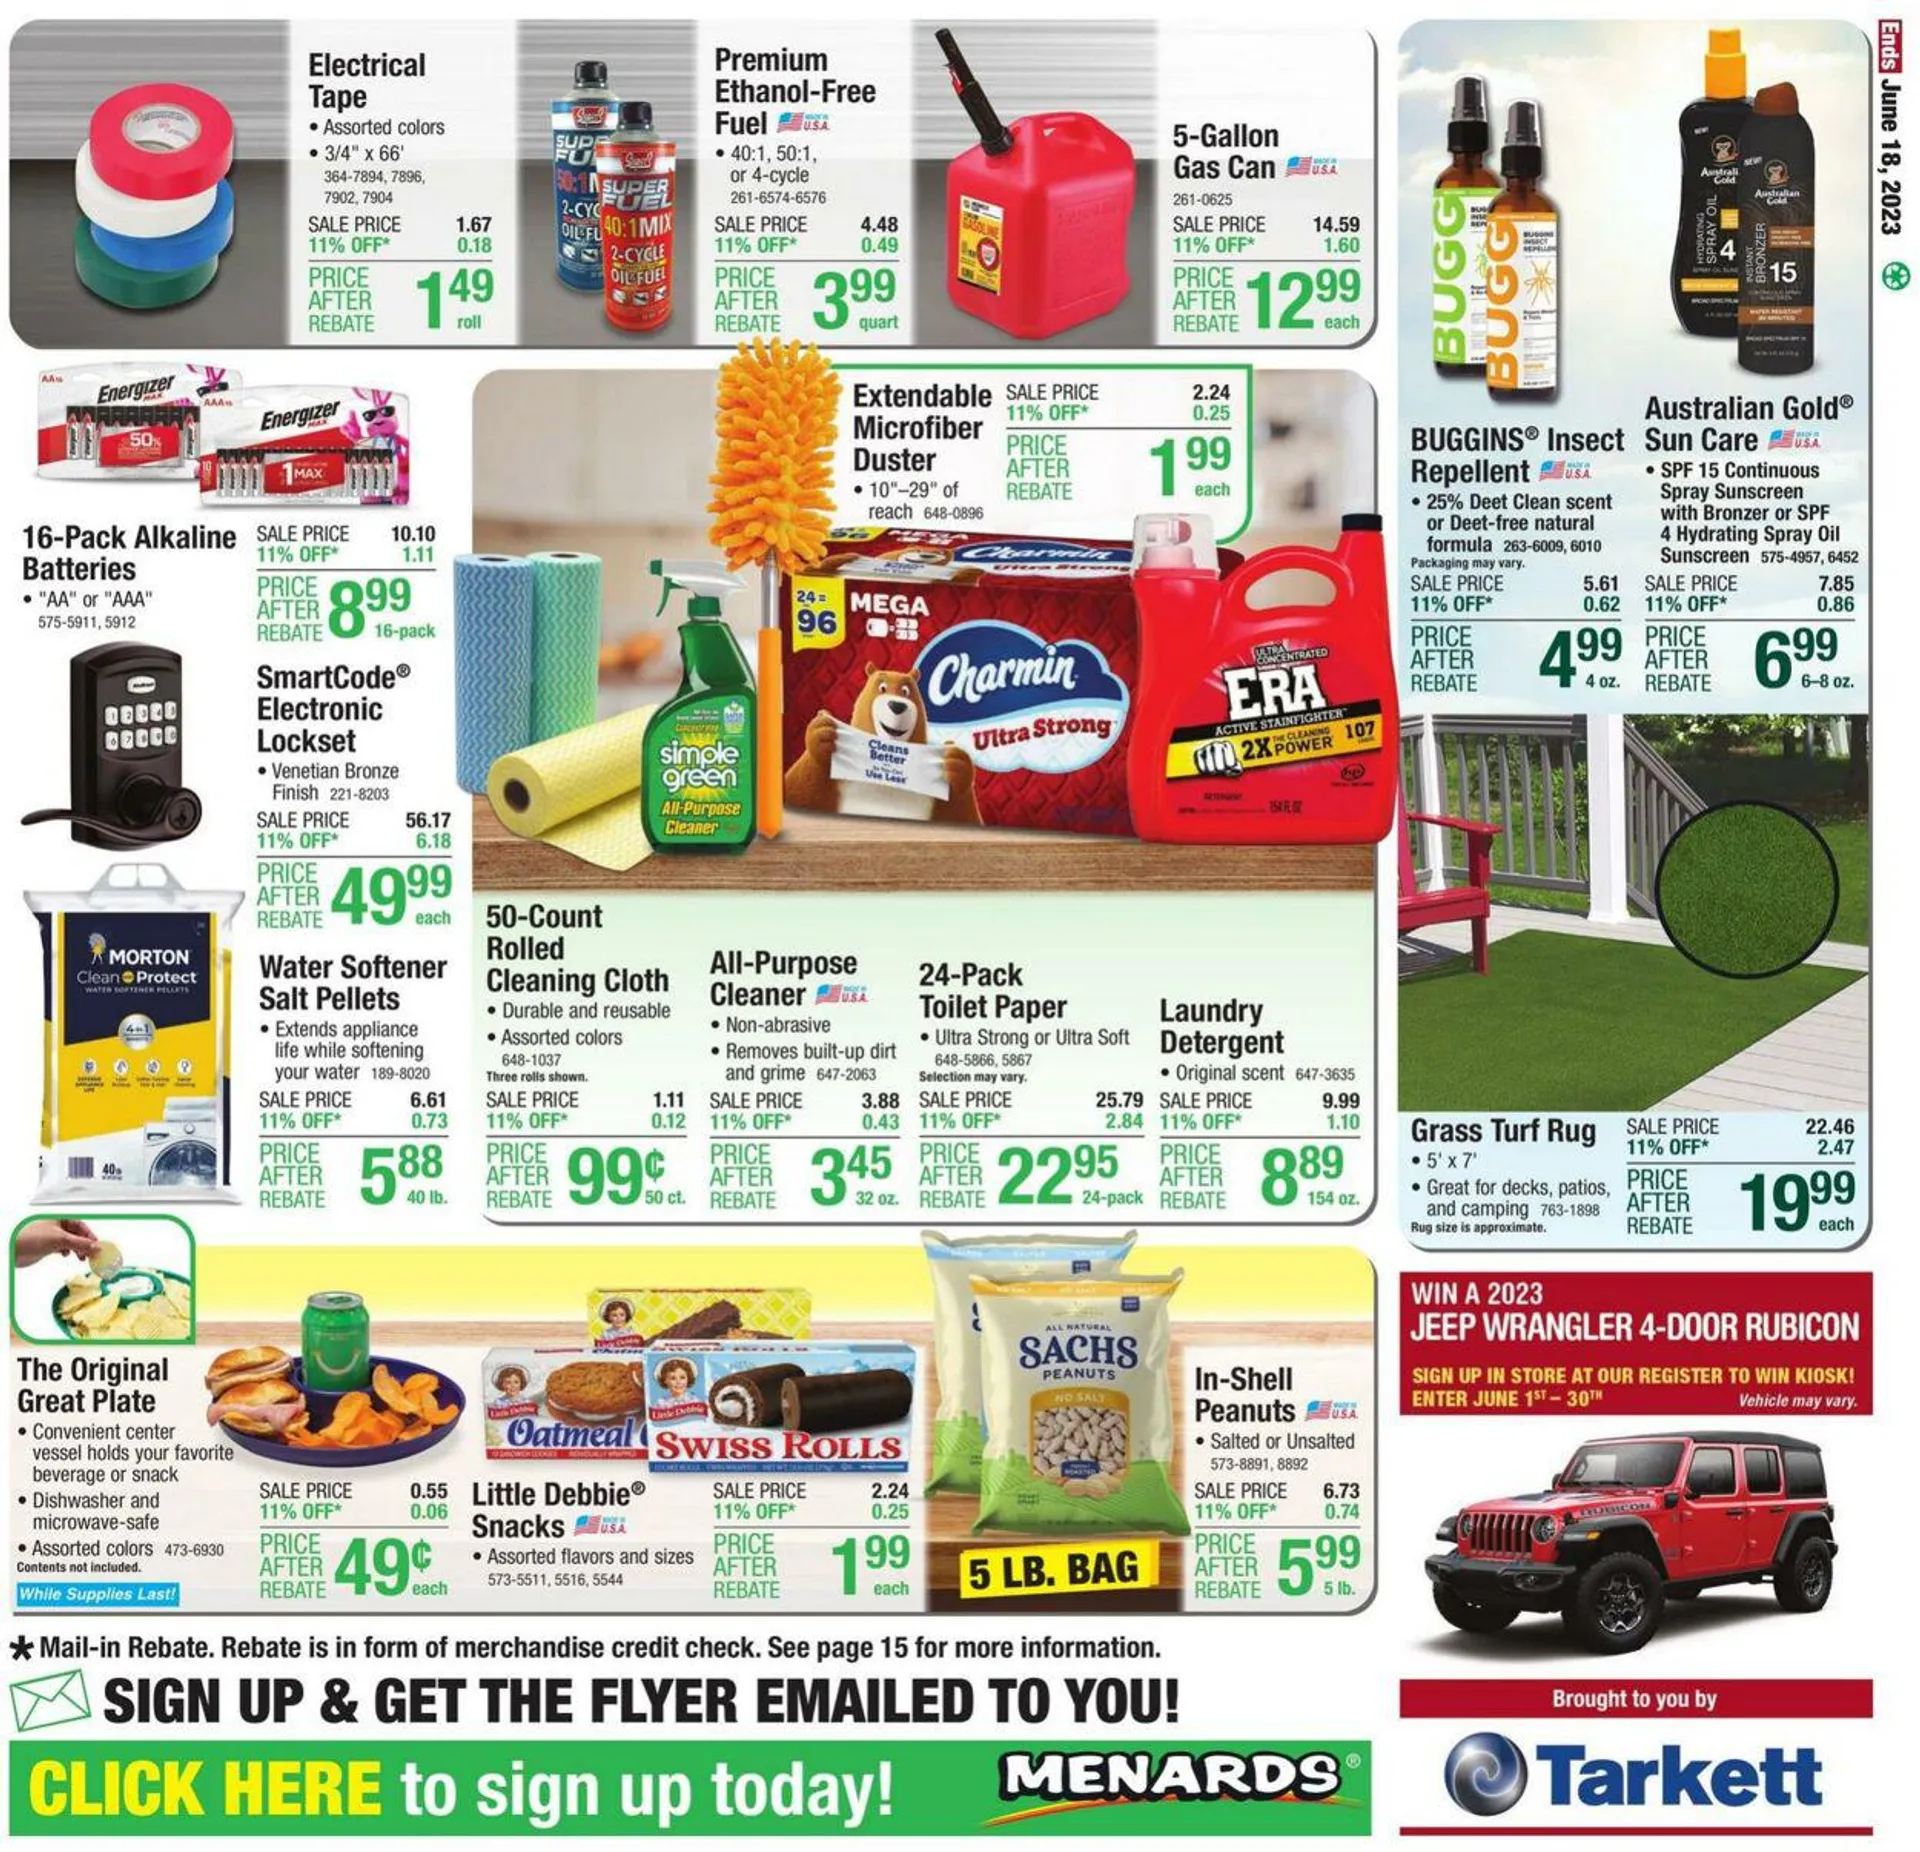 Menards Current weekly ad - 35